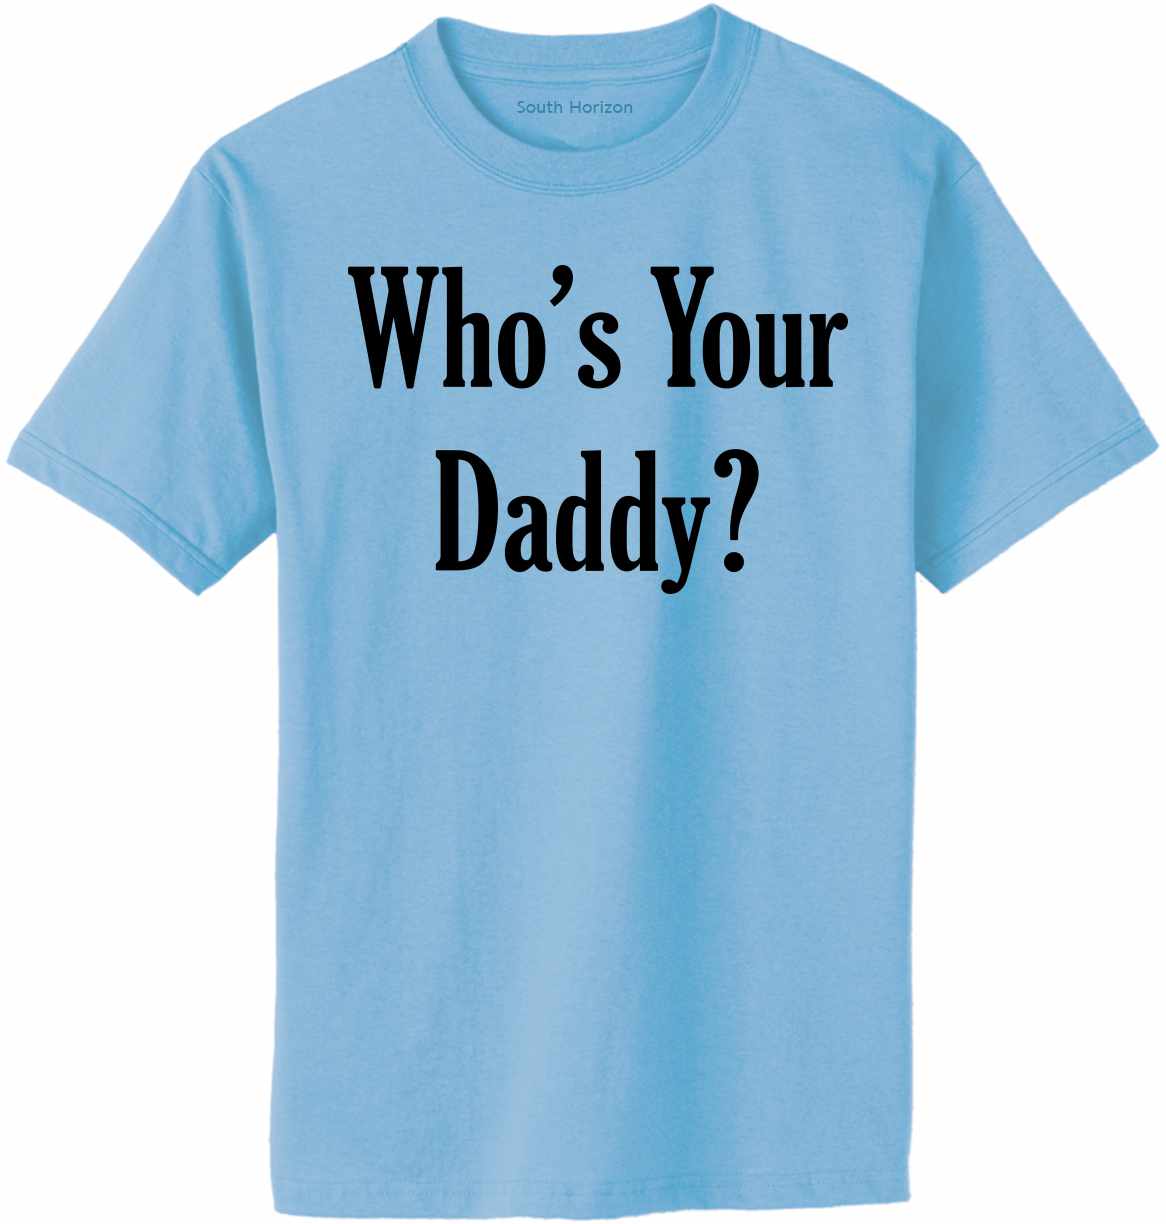 Who's Your Daddy Adult T-Shirt